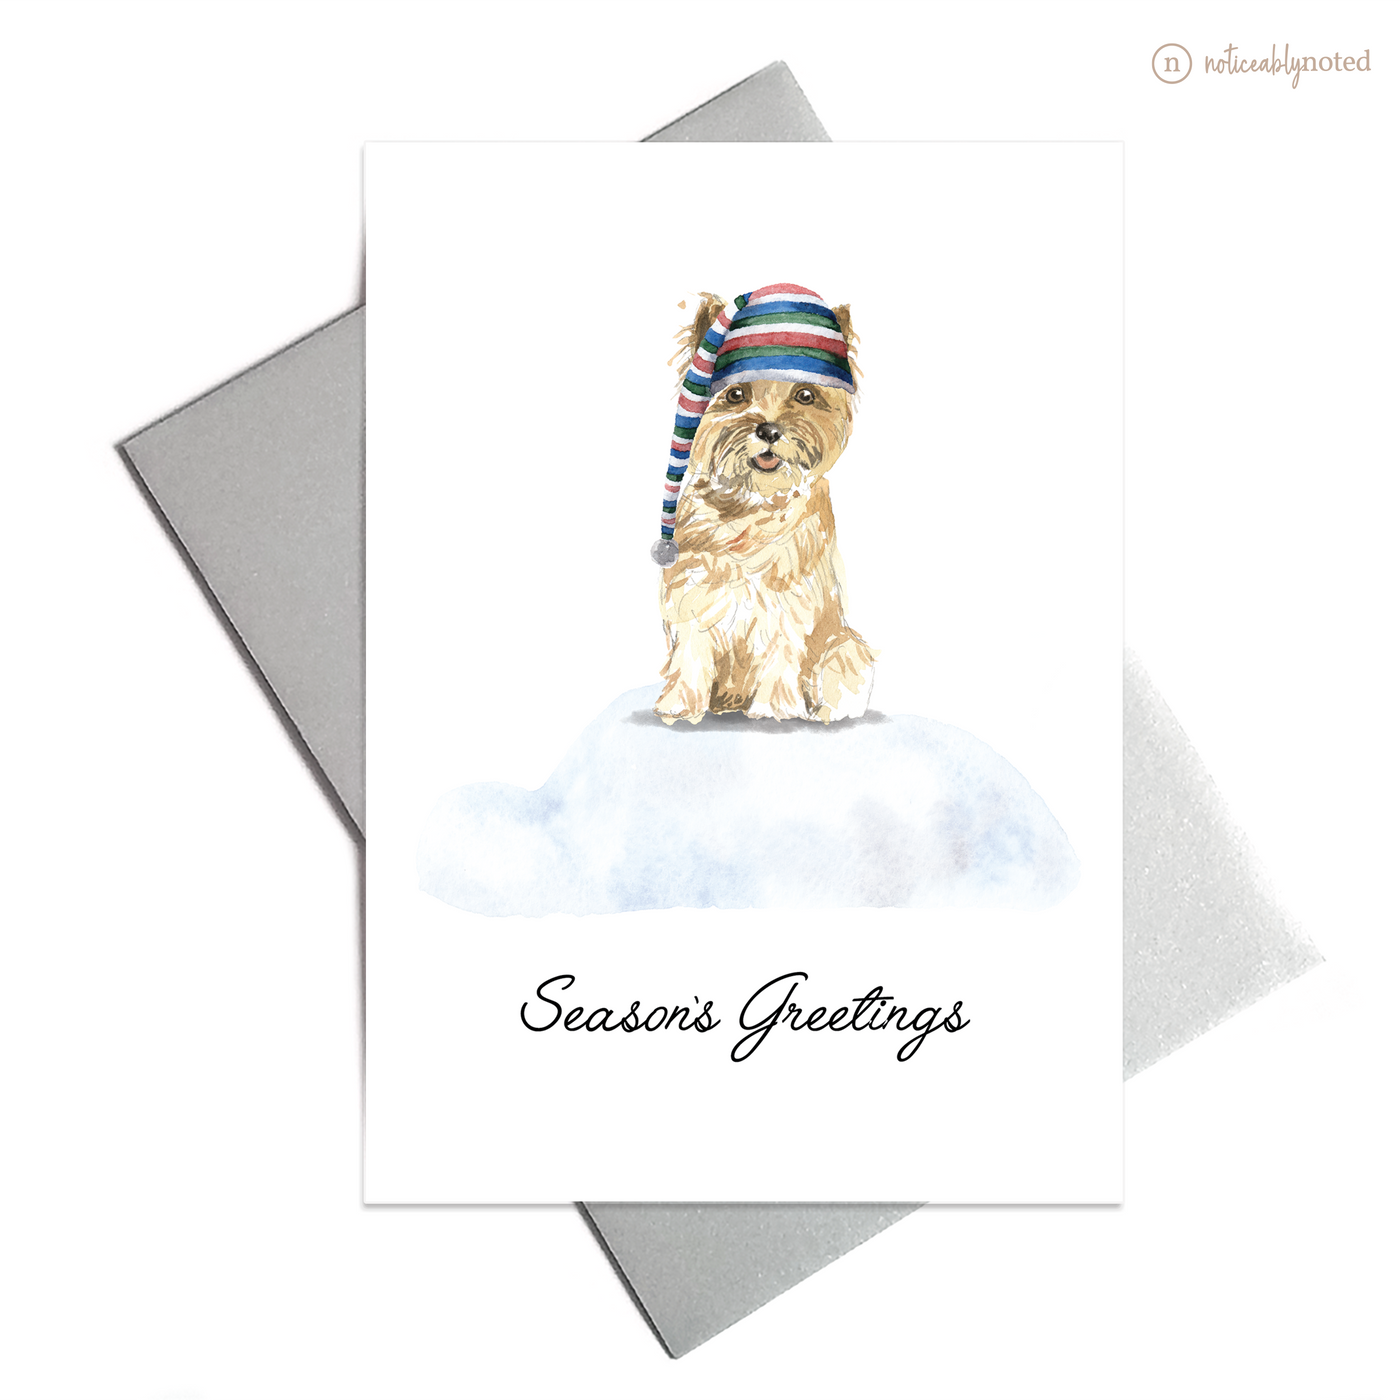 Cairn Terrier Dog Holiday Card | Noticeably Noted